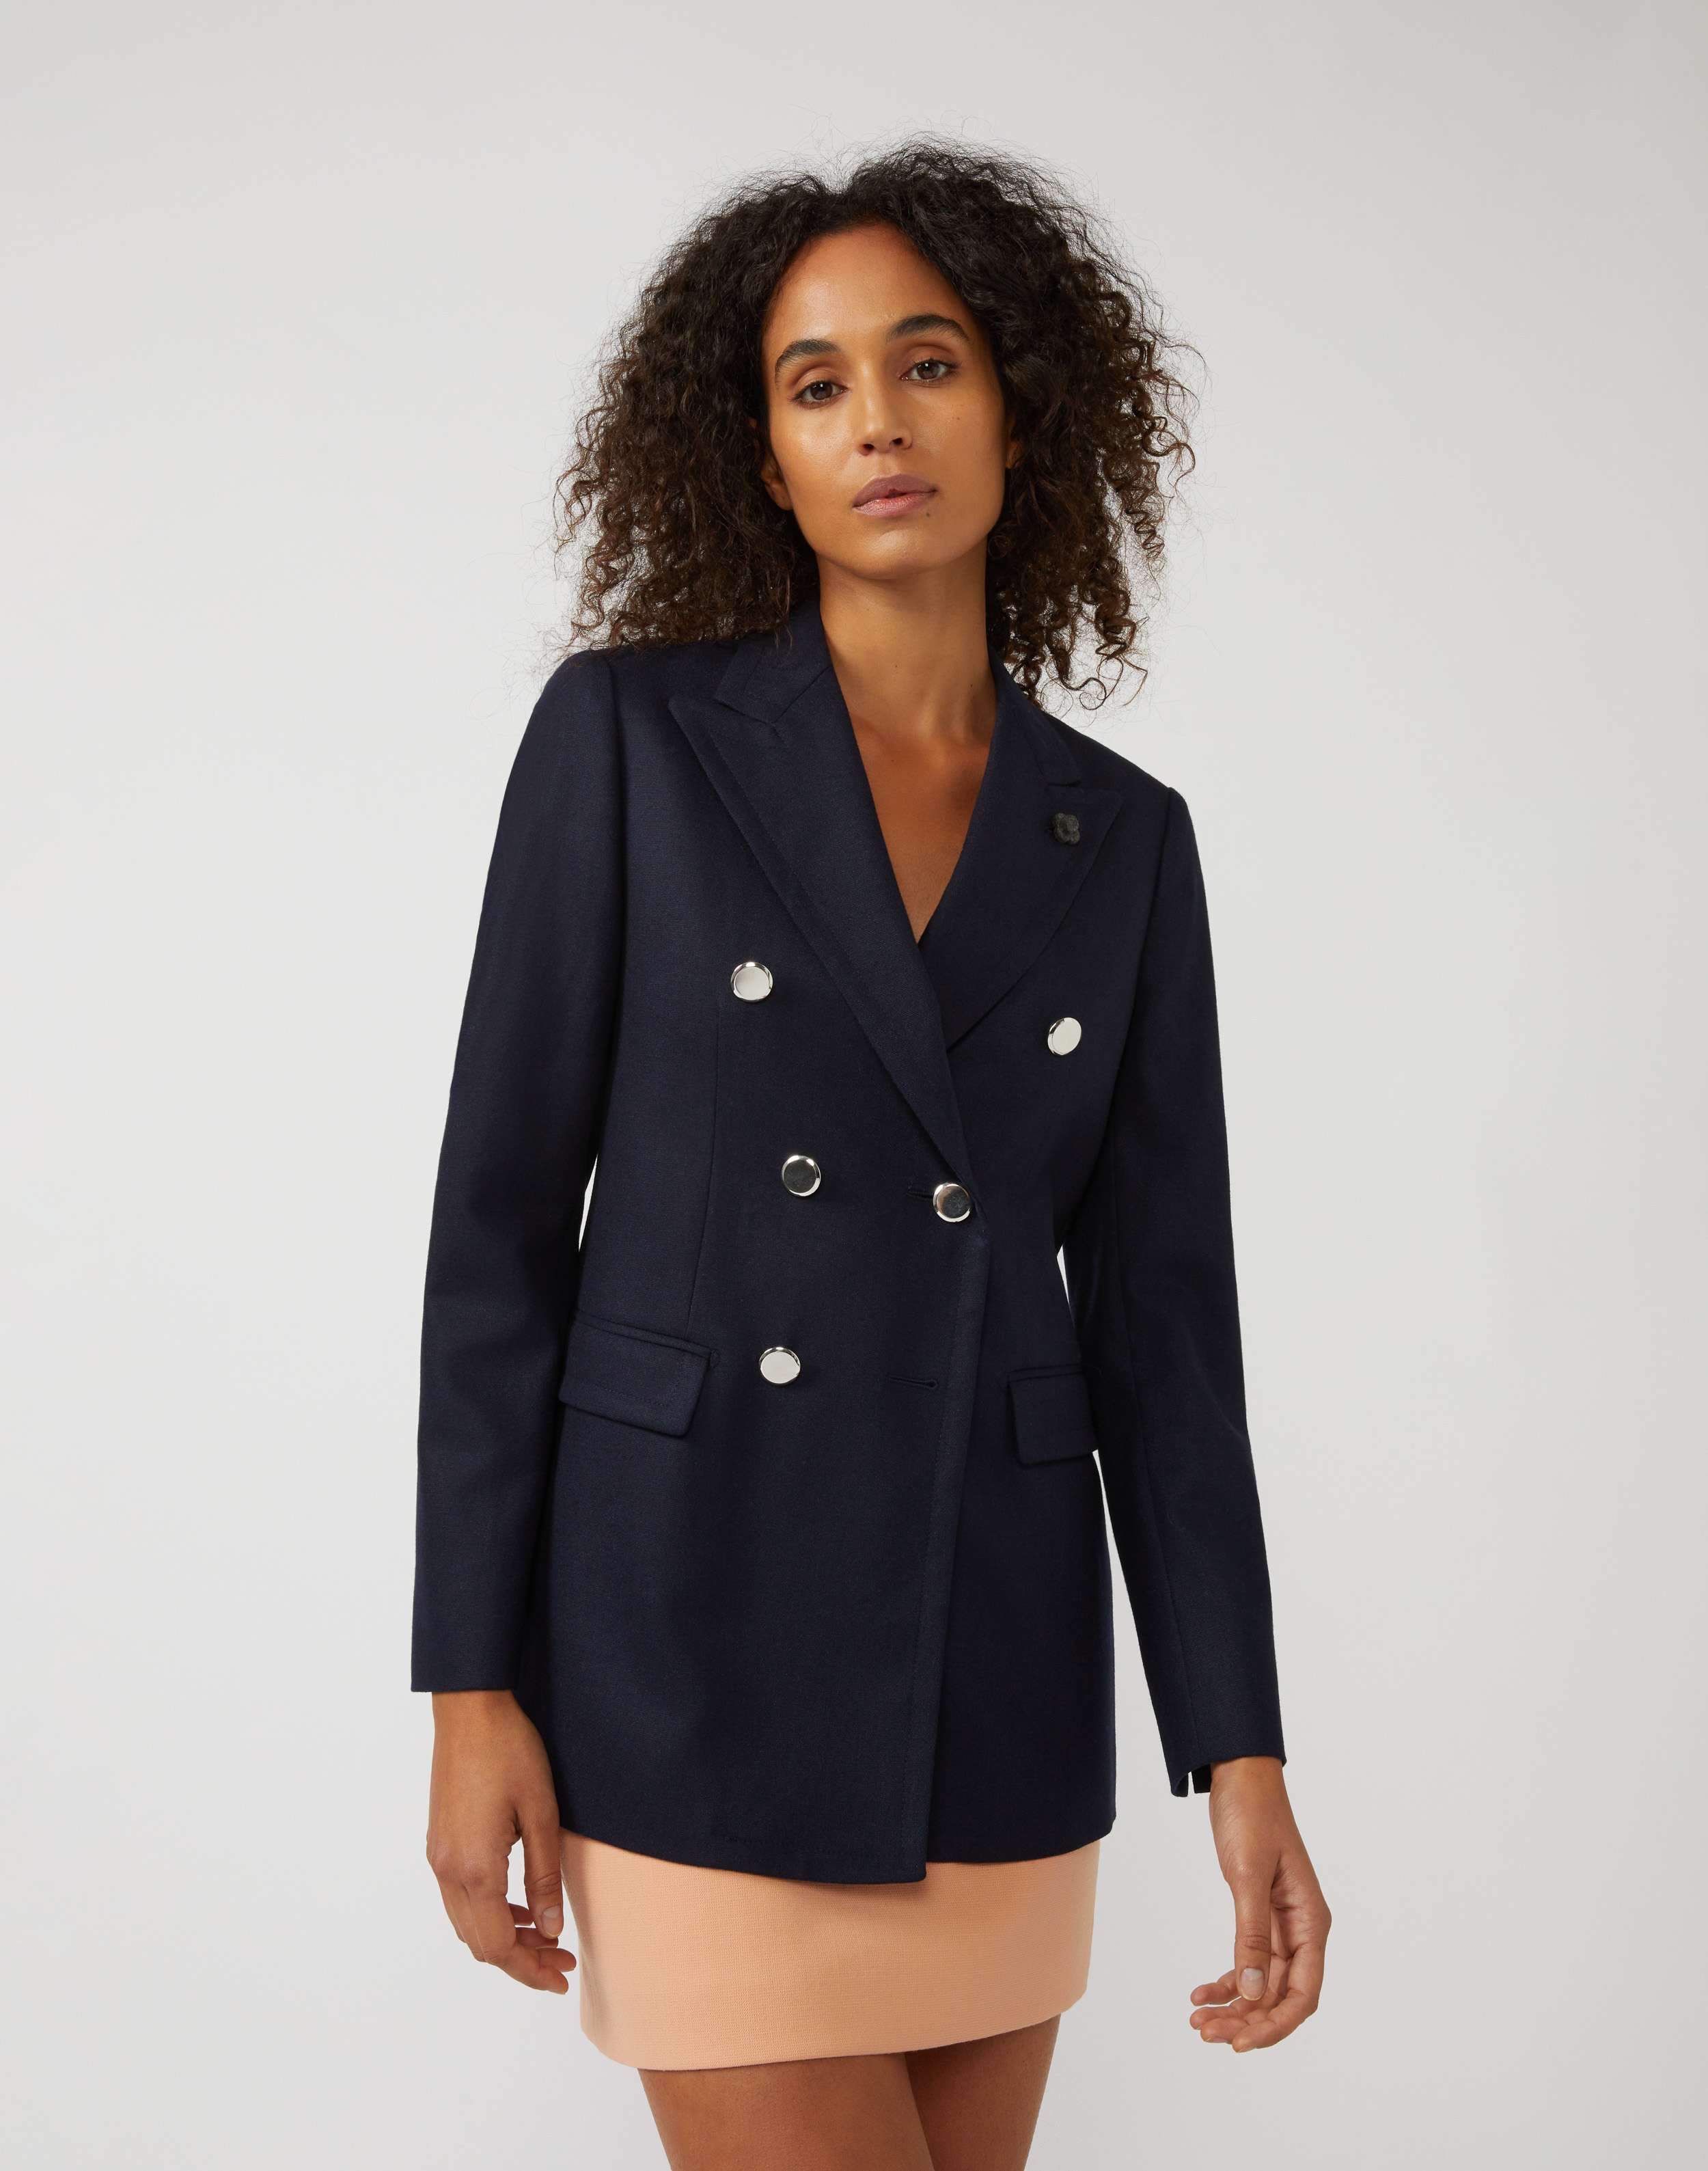 Double-breasted jacket in blue cashmere